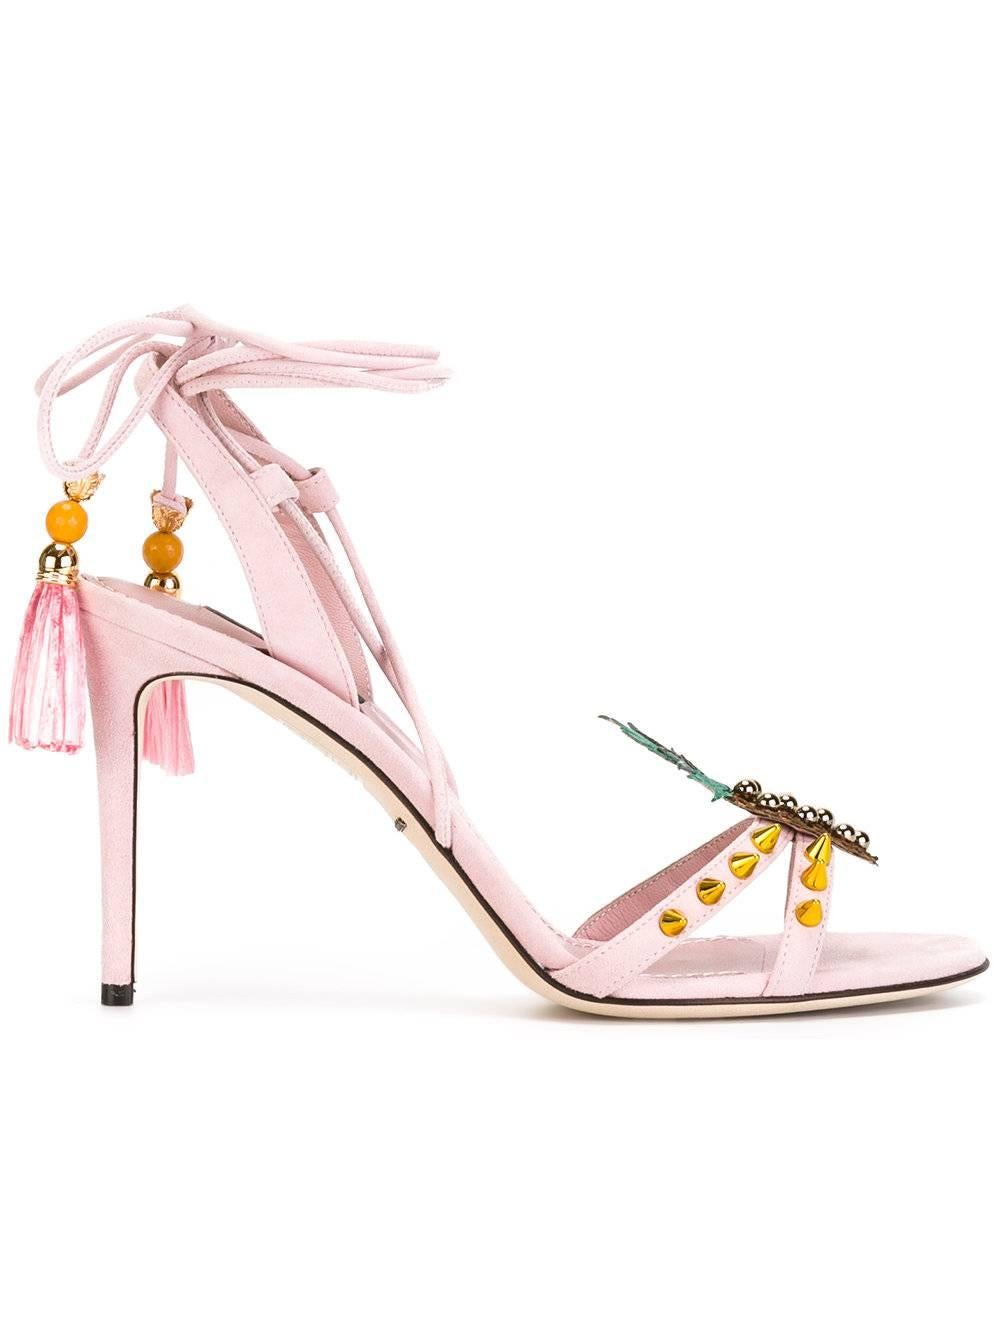 Dolce & Gabbana New Sold Out Pink Suede Ankle Tie Wrap Heels Sandals in Box In New Condition In Chicago, IL